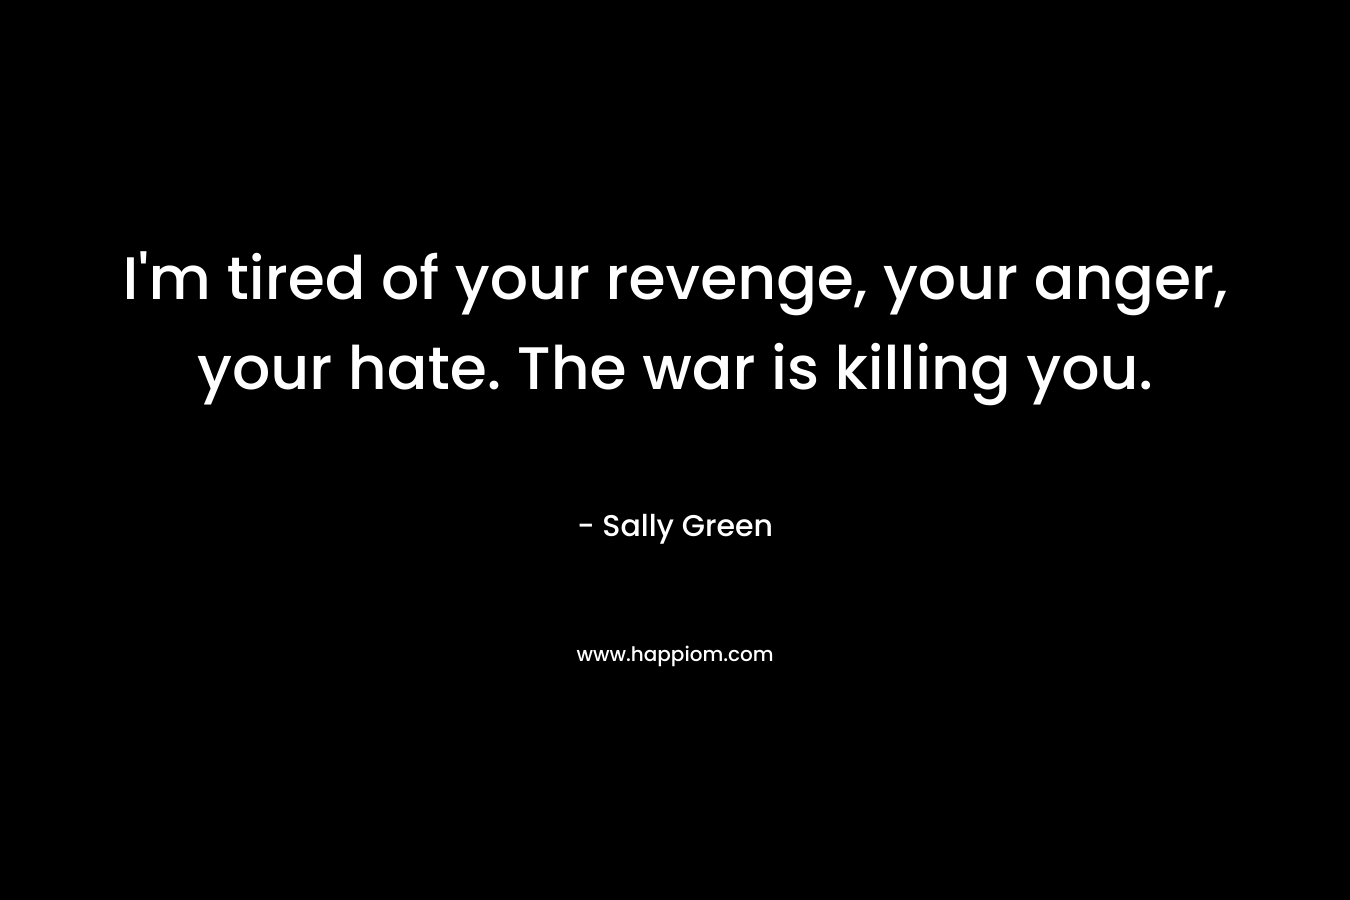 I’m tired of your revenge, your anger, your hate. The war is killing you. – Sally Green